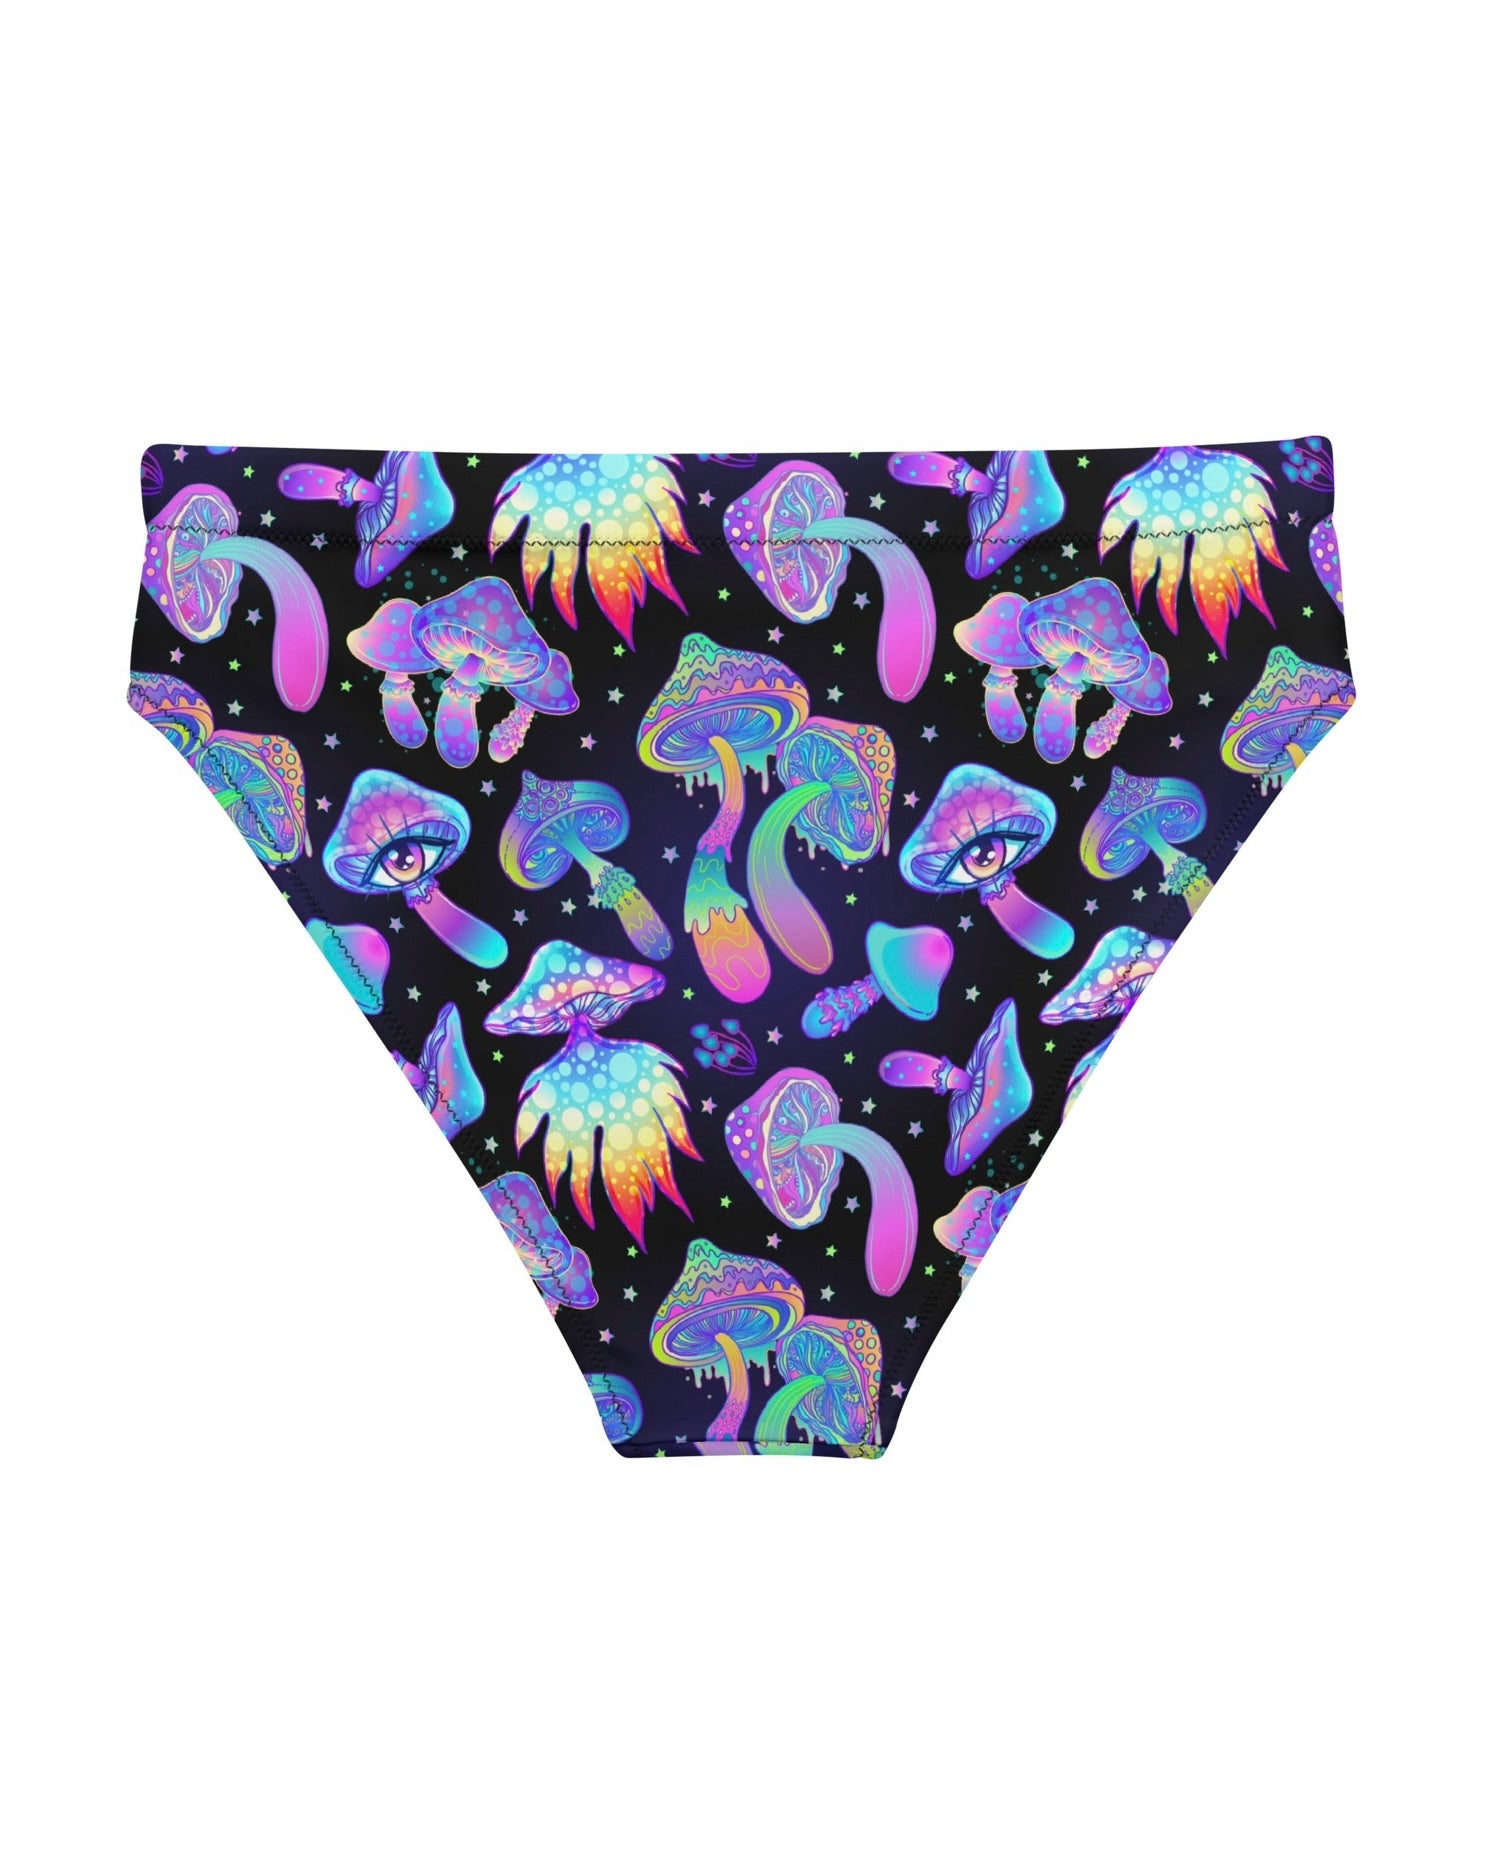 Shroomin Black Recycled High Waisted Bottoms, High-Waisted Bottoms, - One Stop Rave